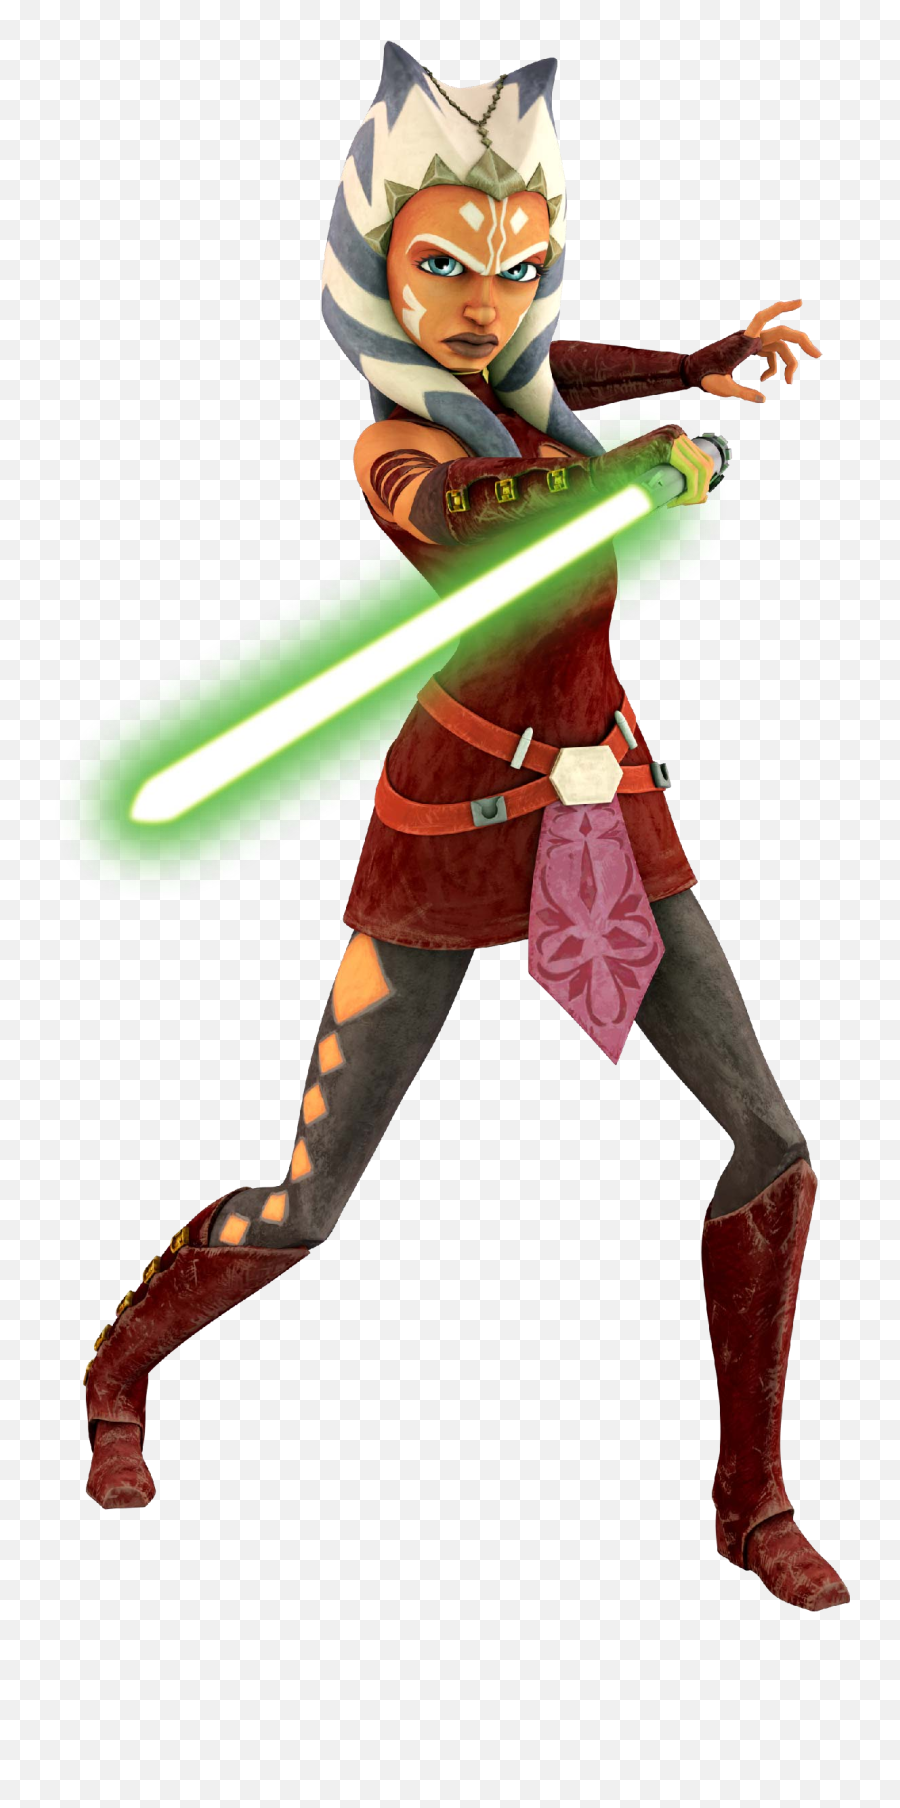 How Ea Star Wars Battlefront 2 From A Certain Point Of View - Clone Wars Ahsoka Tano Png,Star Wars Battlefront 2 Png